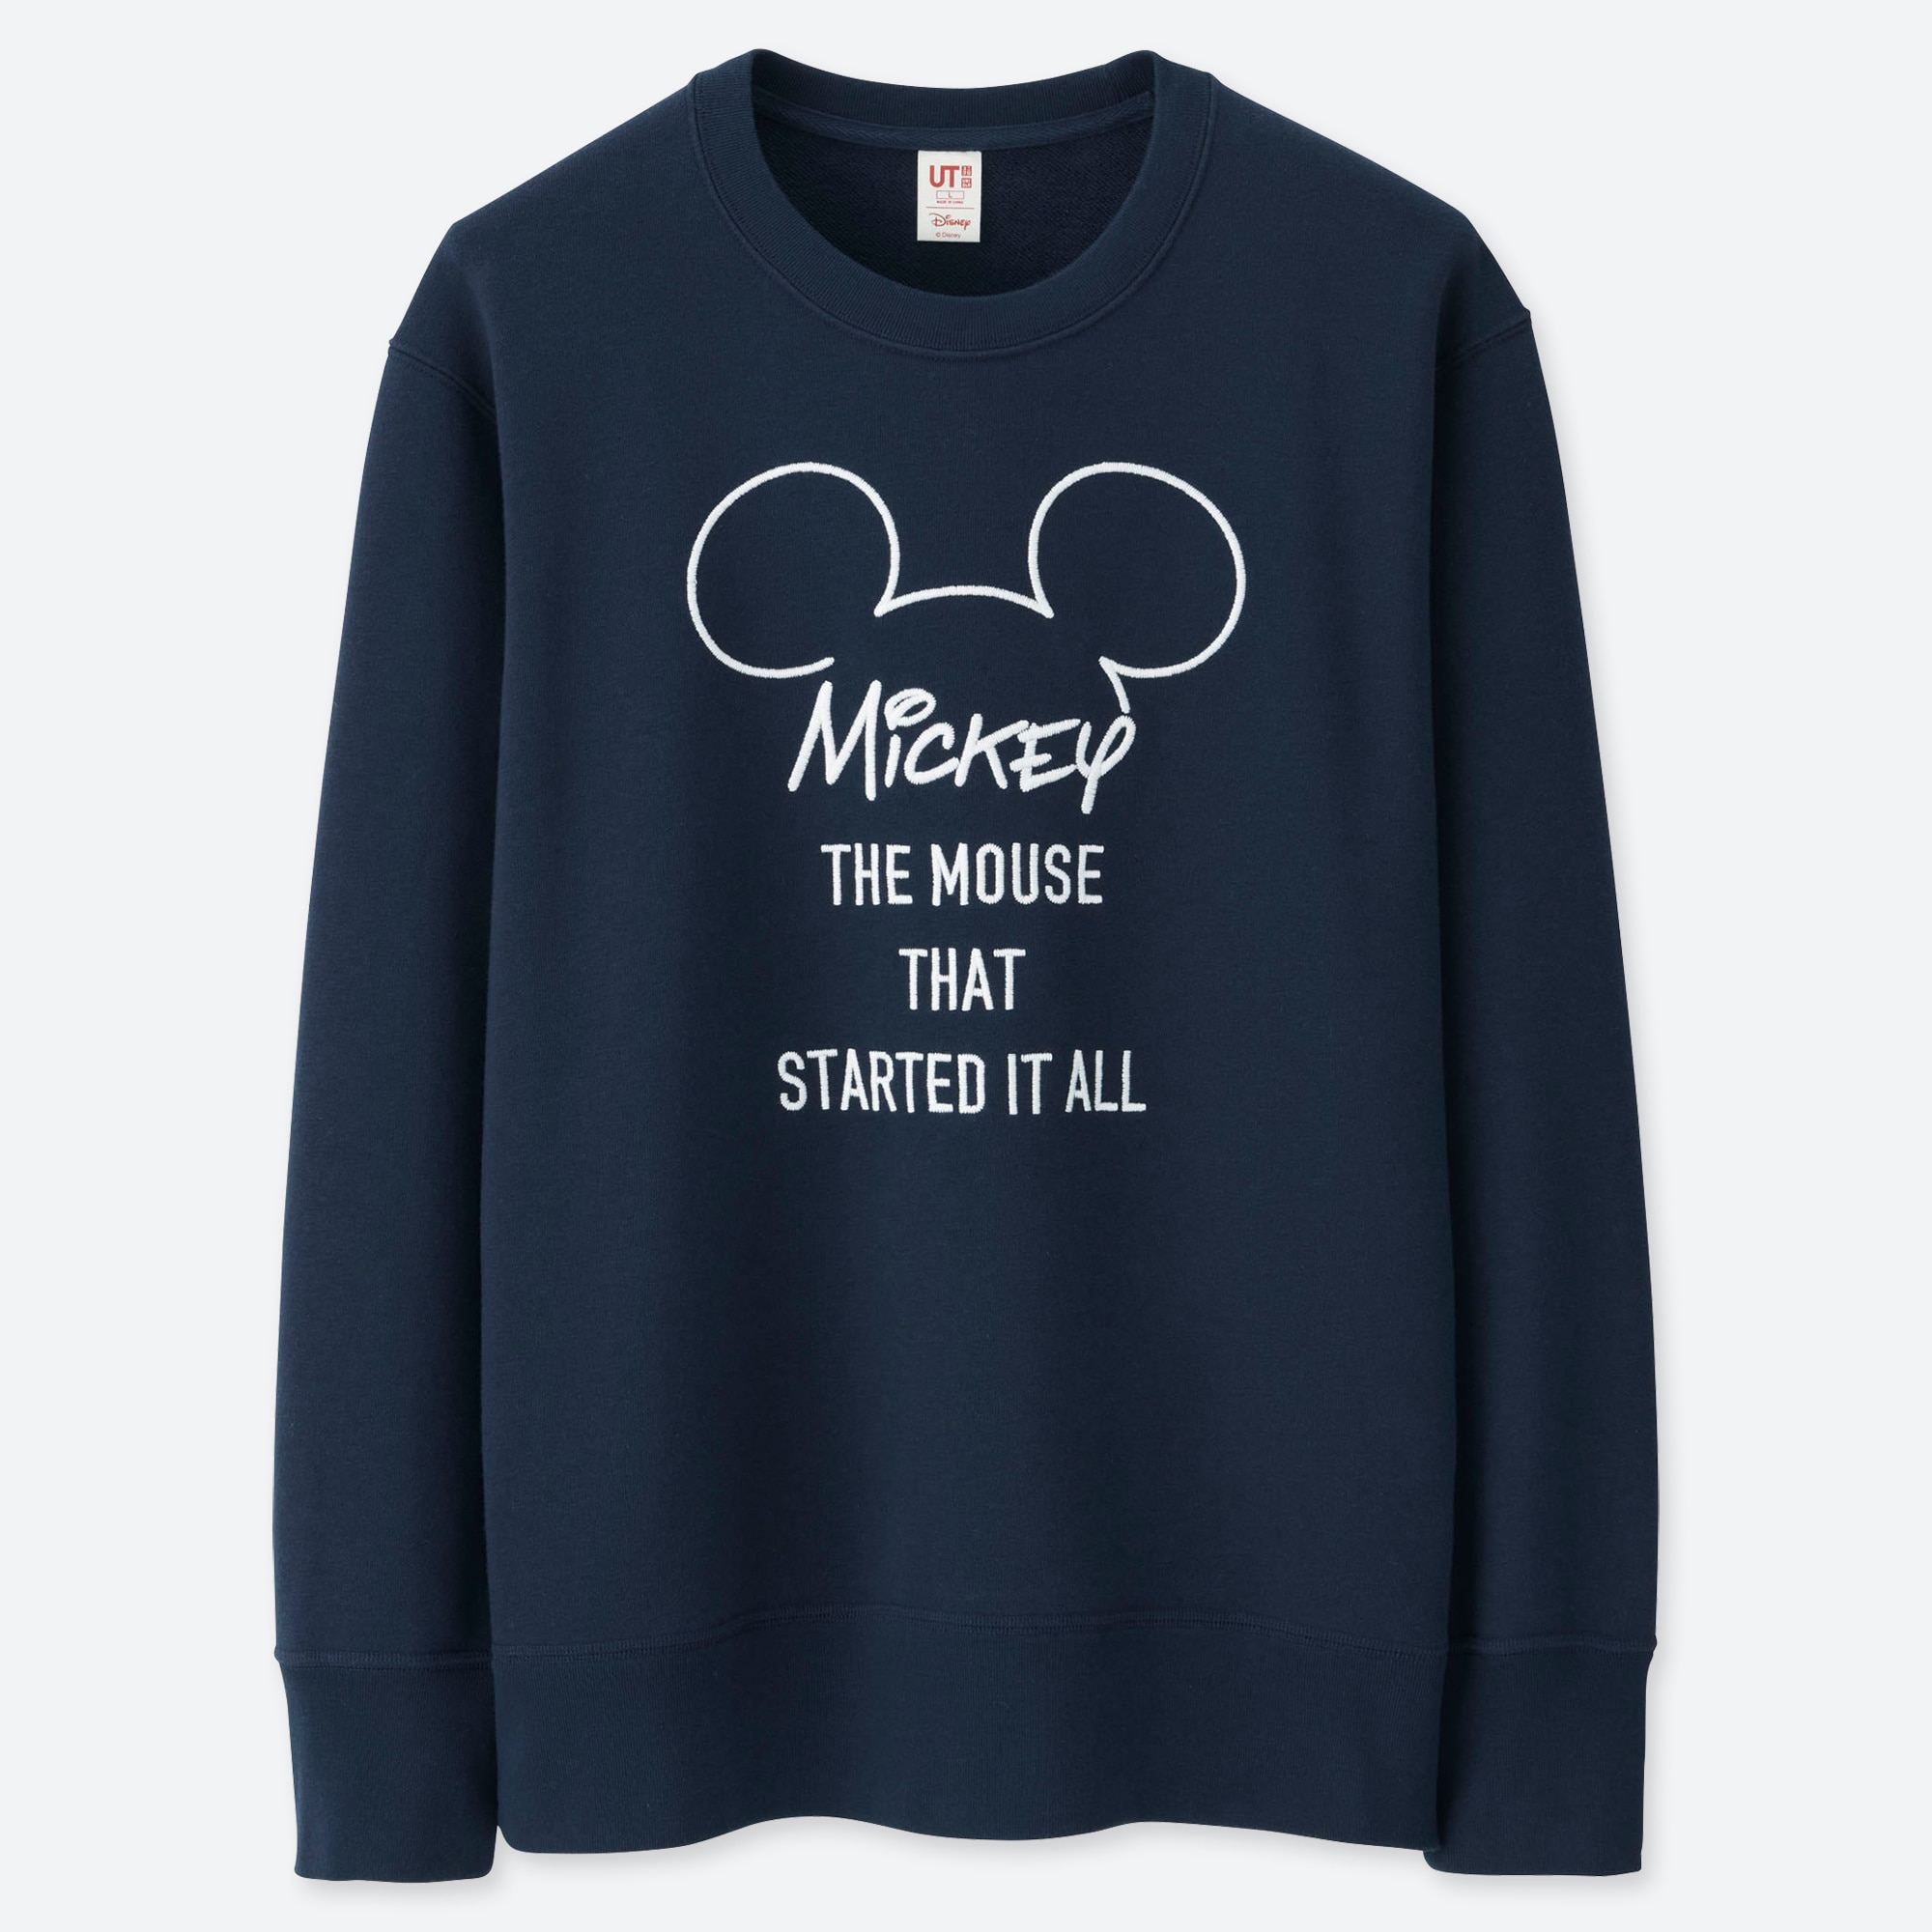 the mouse that started it all shirt